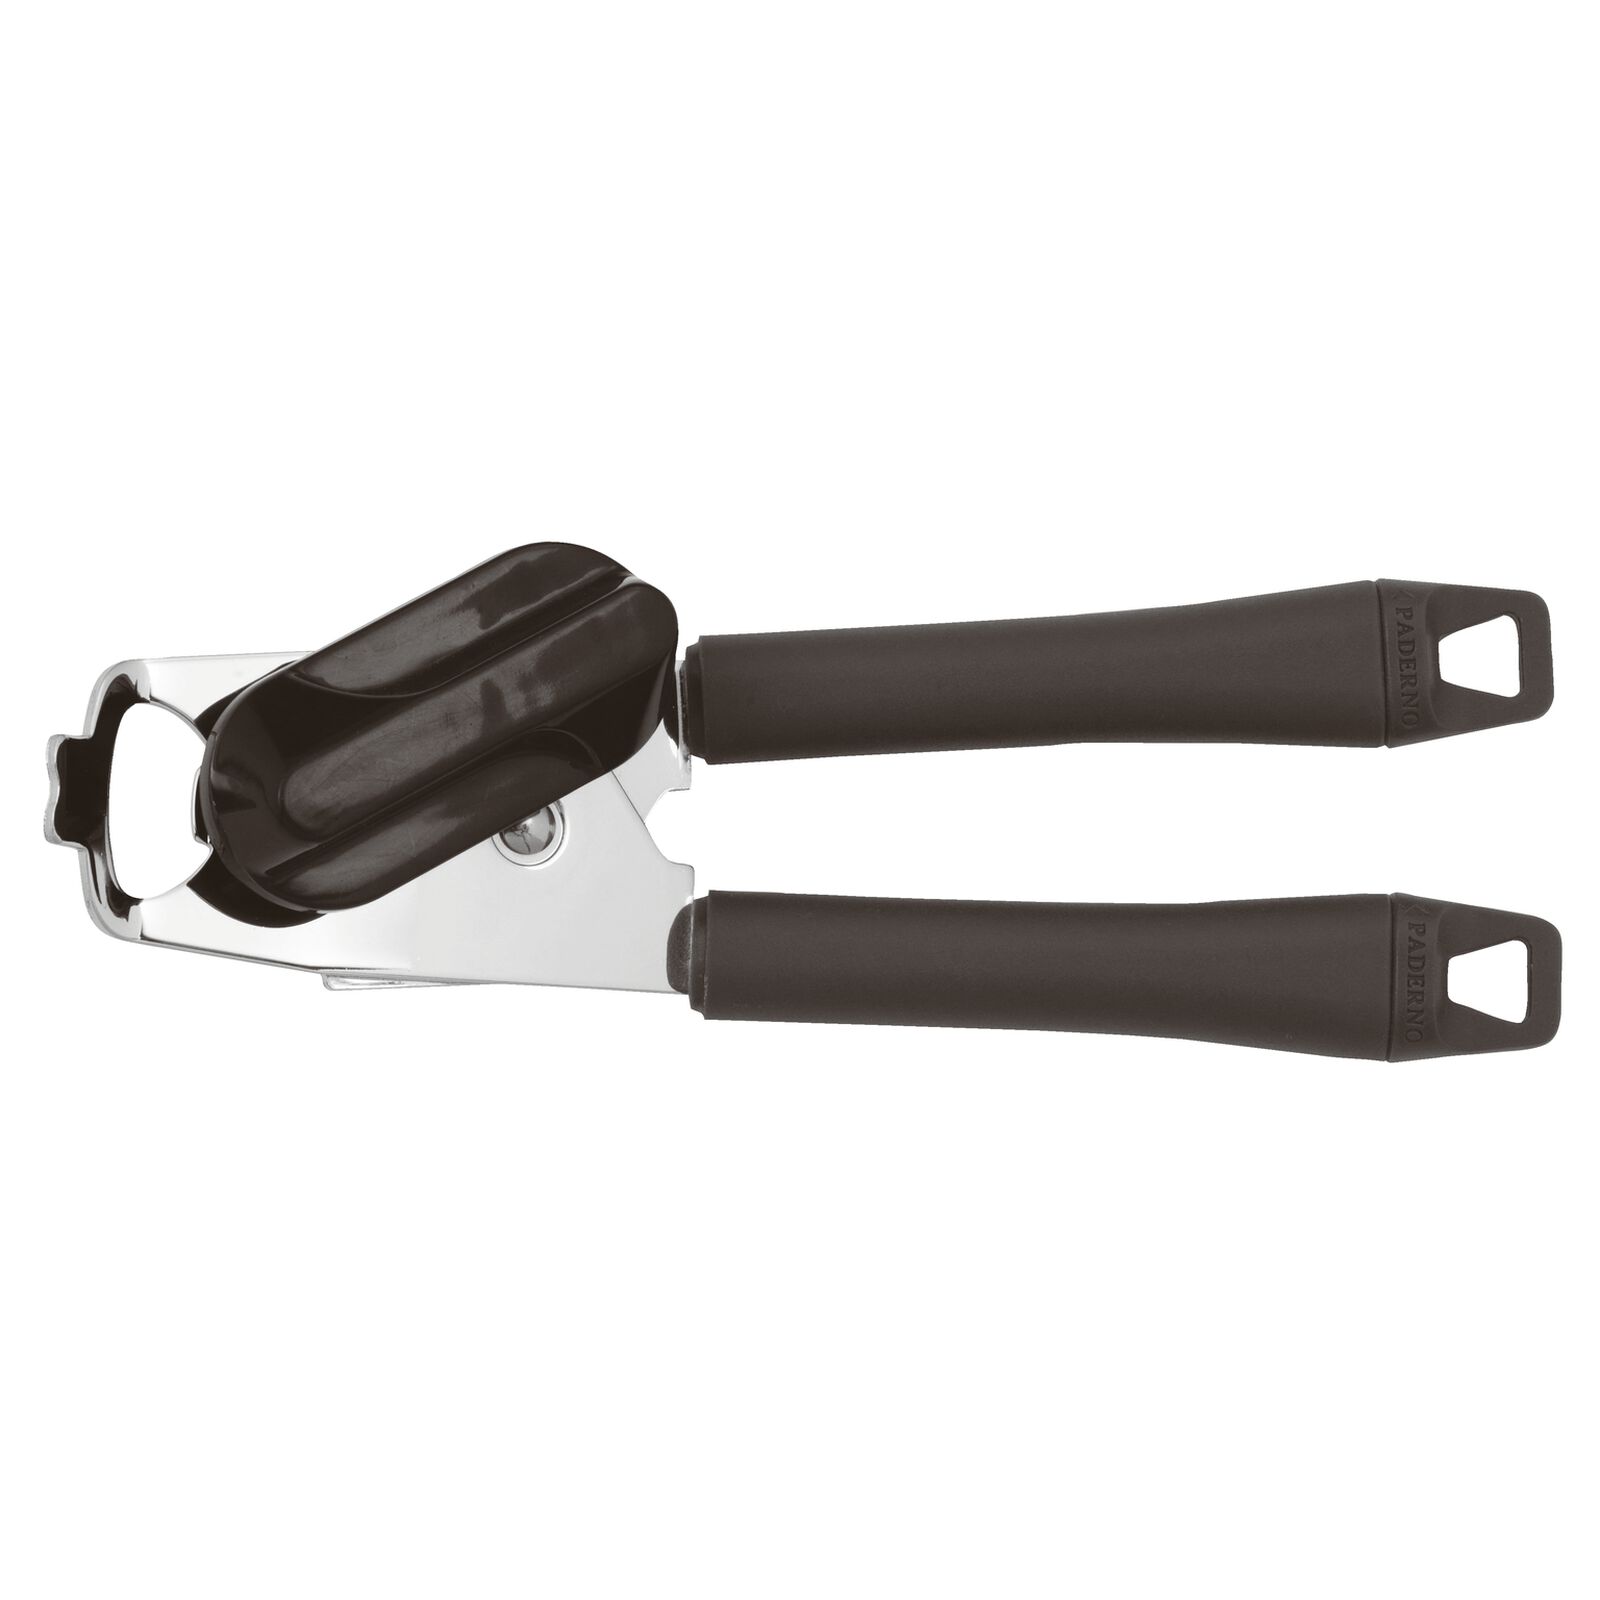 Paderno World Cuisine Can Opener with Polypropylene Handle